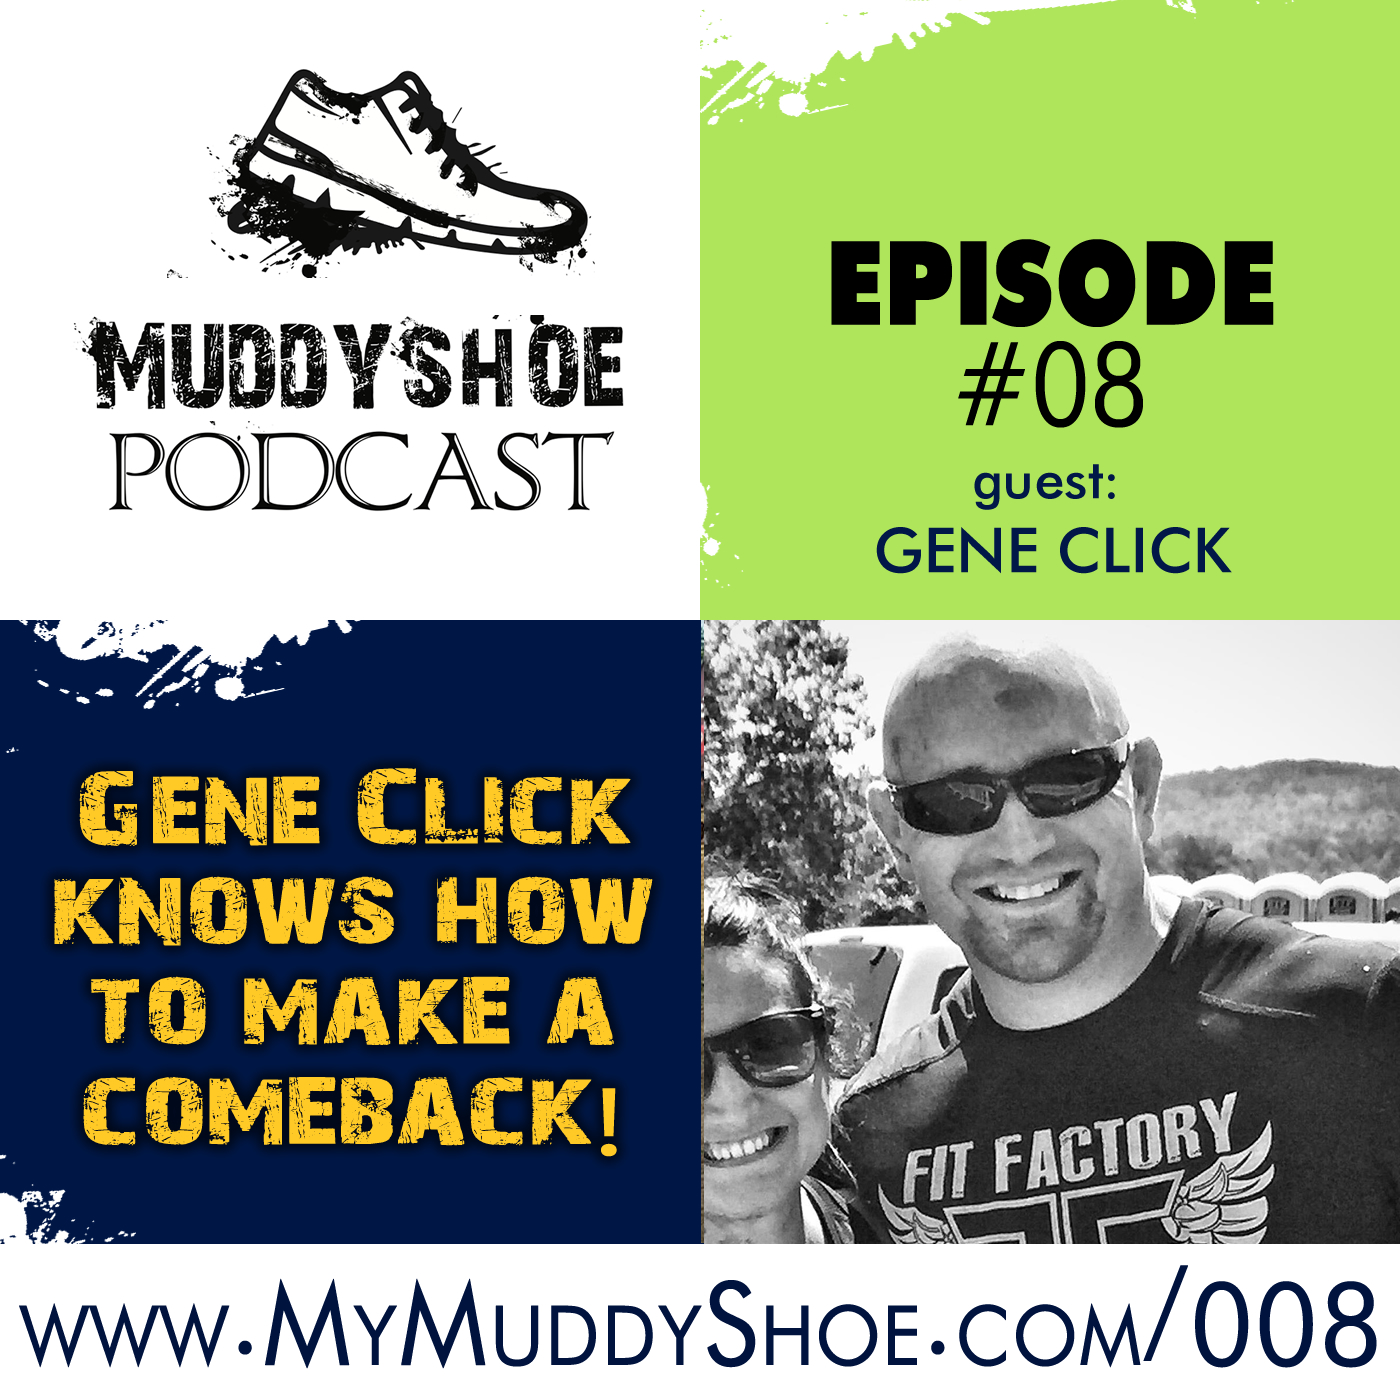 The Muddy Shoe #008 - Gene Click knows how to make a comeback!